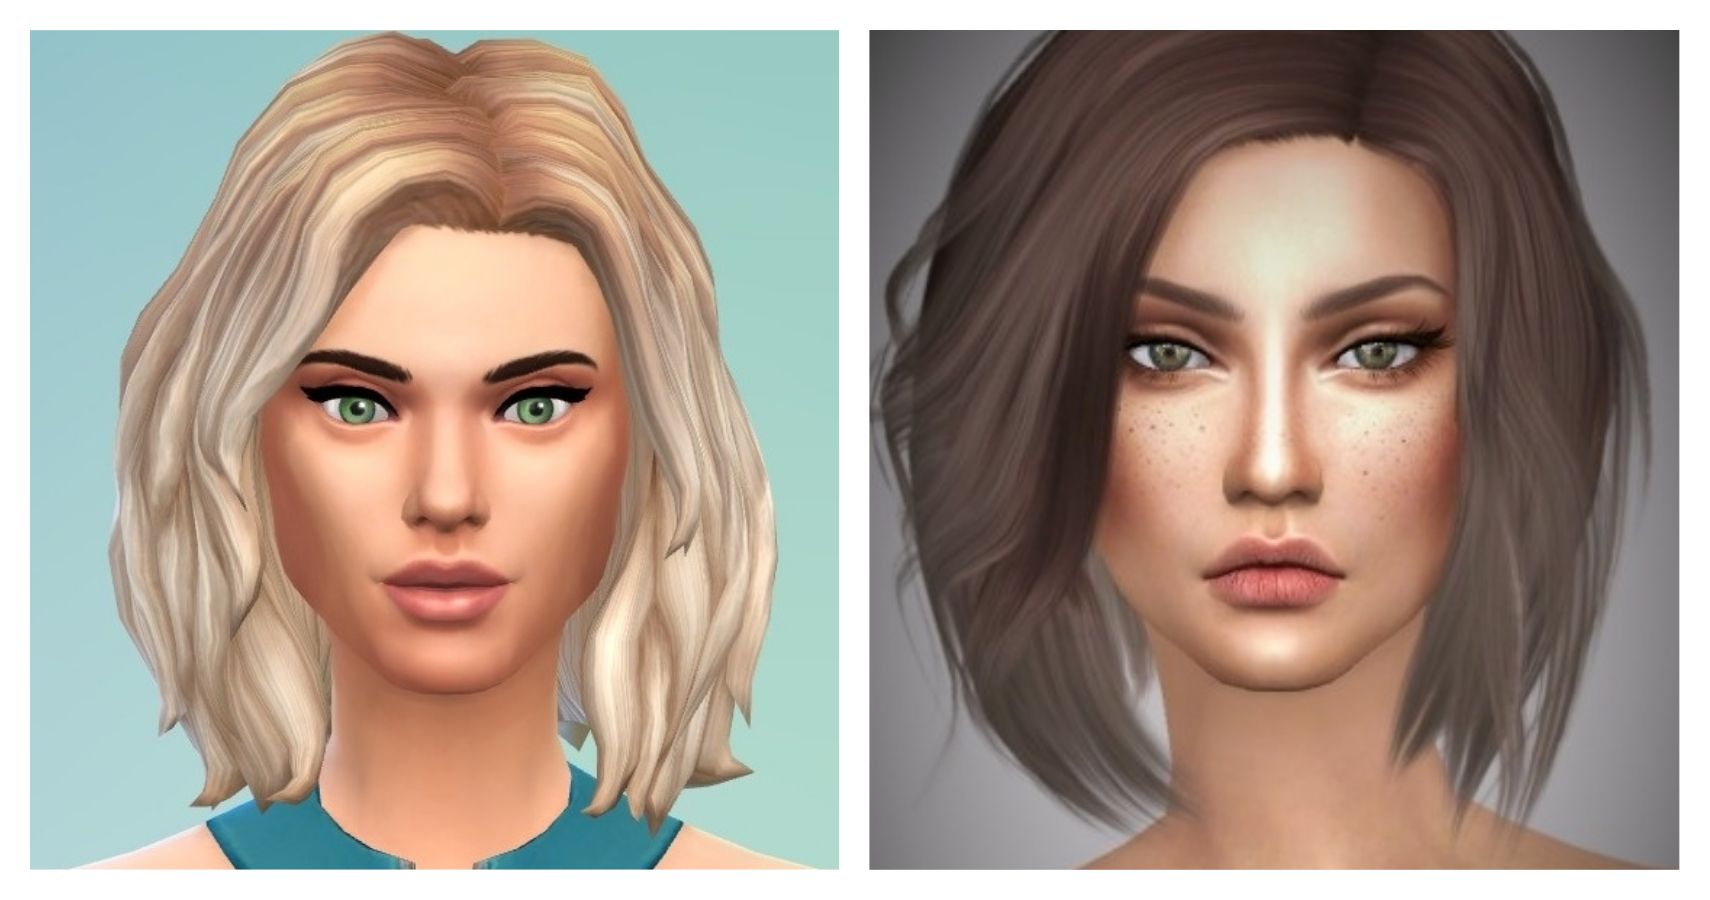 sims 4 mods download